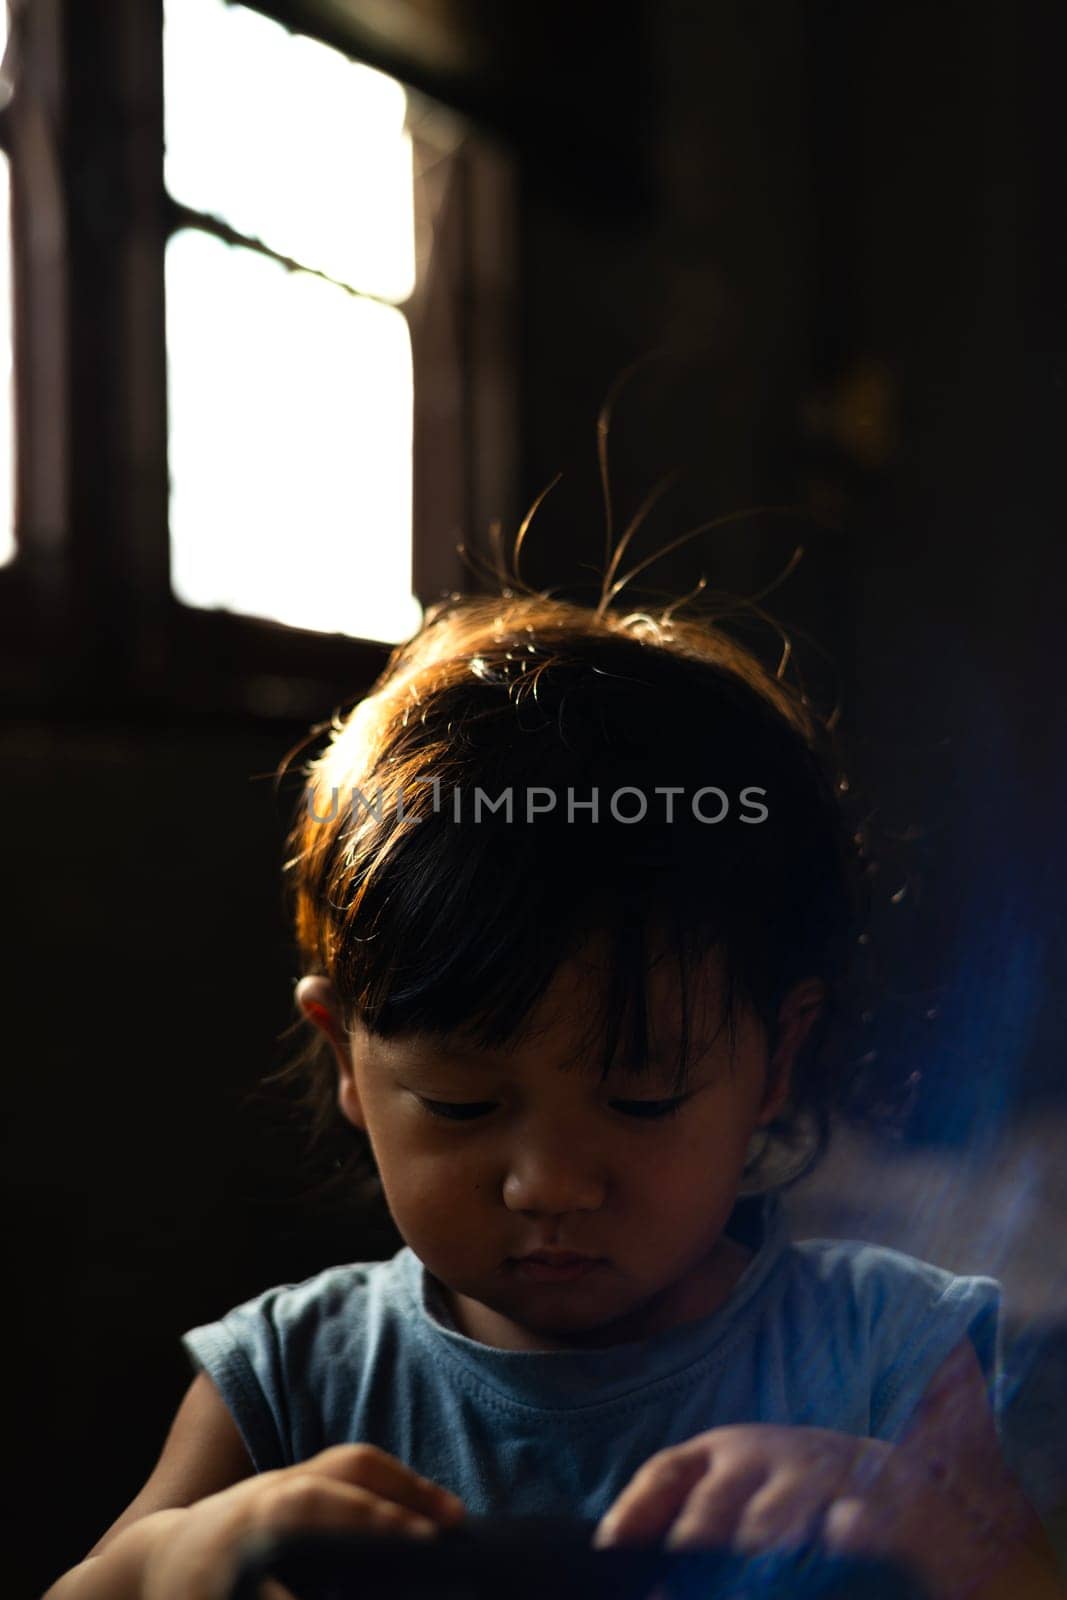 Boy sitting with his head down playing with a toy in a dark room.